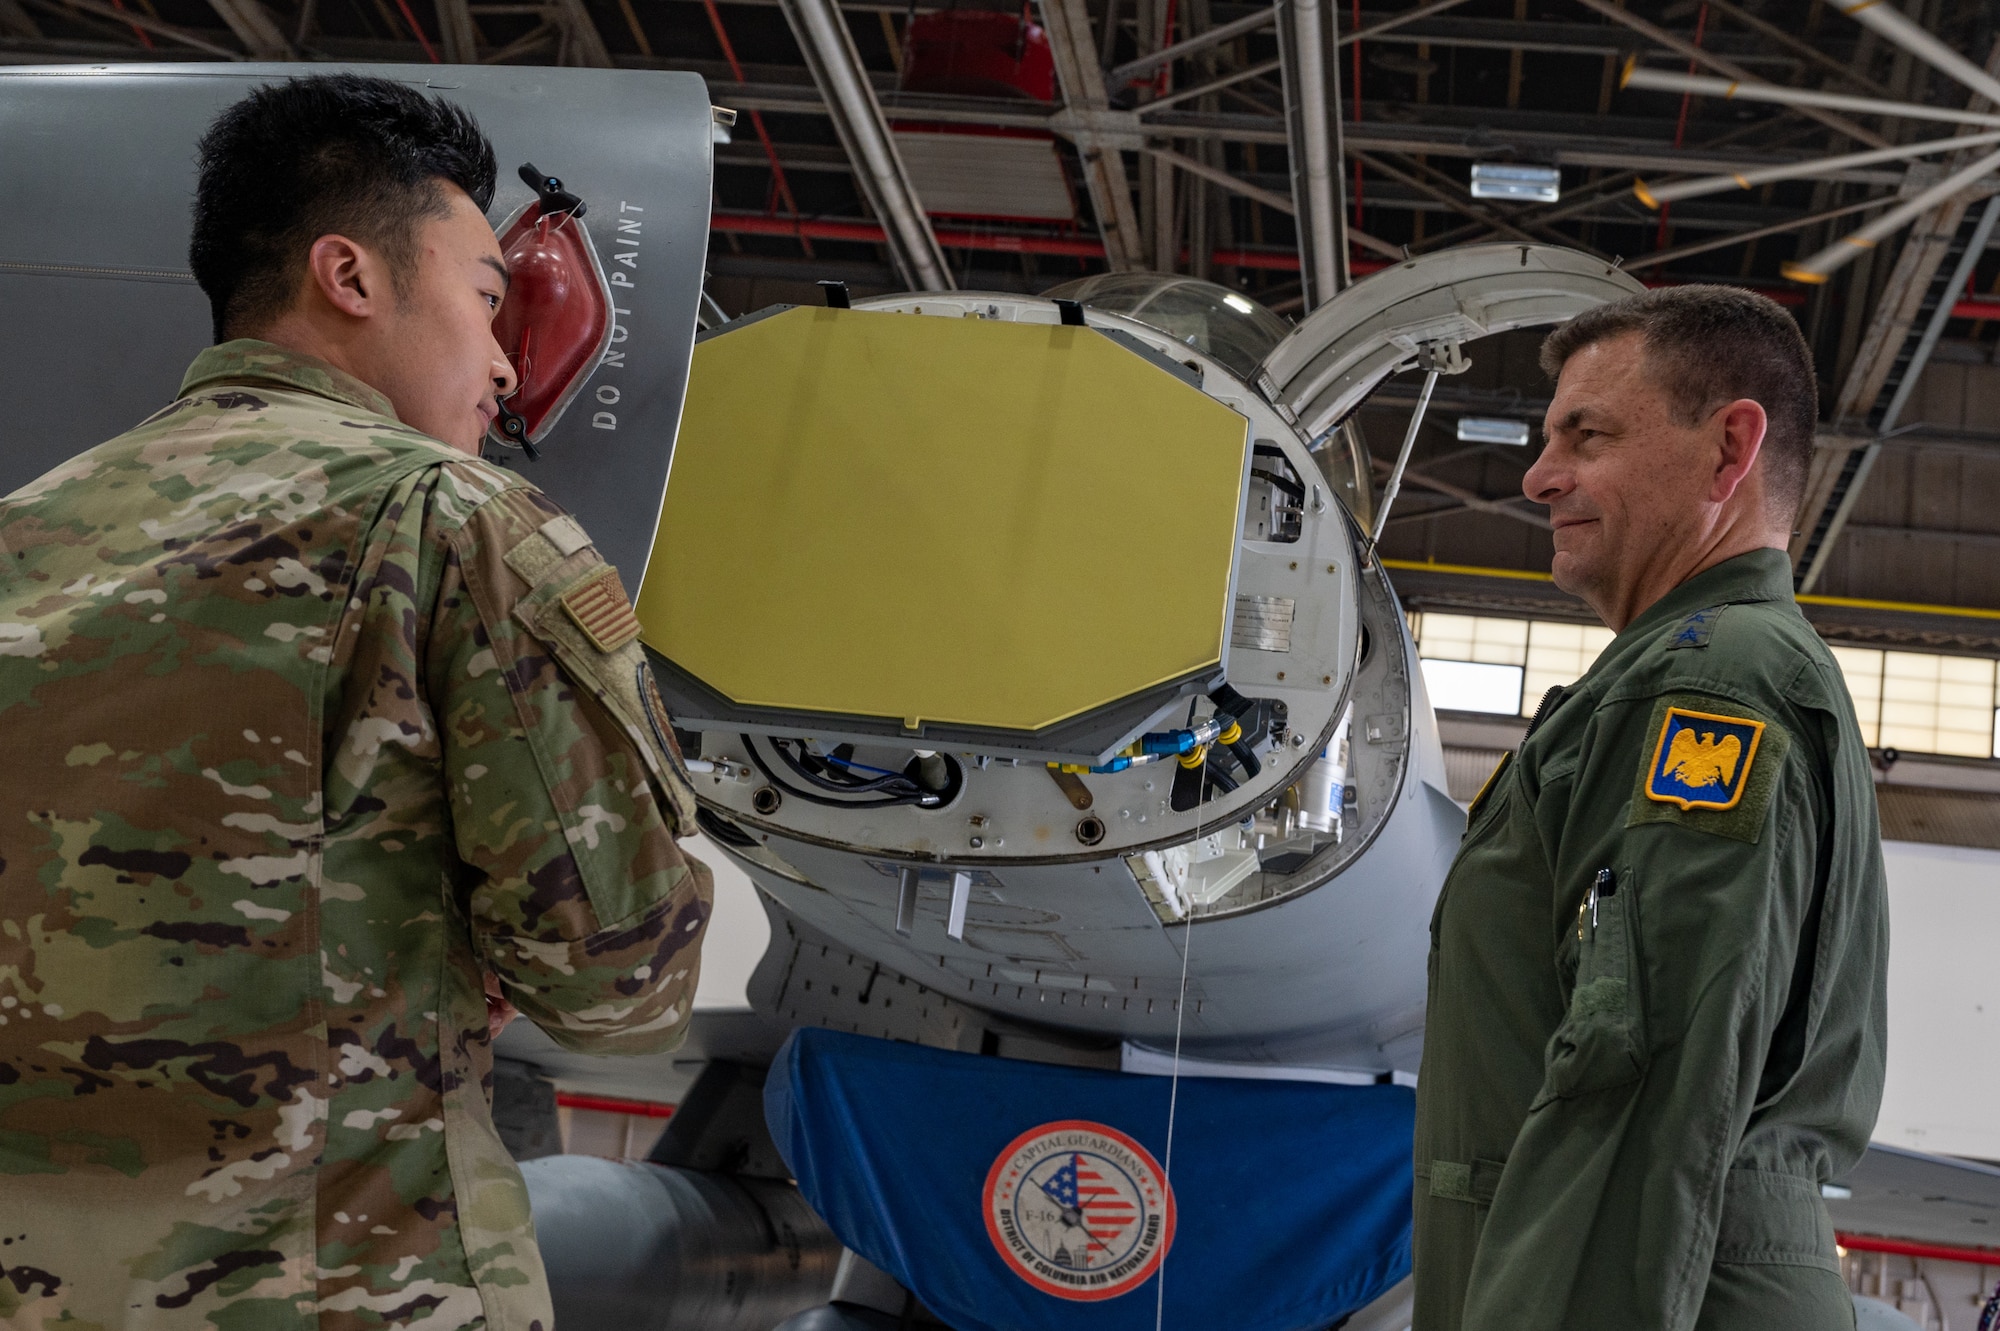 U.S. Air Force Staff Sgt. Jackie Zheng, left, avionics specialist, 113th Wing, District of Columbia National Guard (DCNG), briefs Lt. Gen. Michael A. Loh, right, director, Air National Guard, on the specifications of the APG-83 Active Electronically Scanned Array (AESA) radar now equipped on F-16 Fighting Falcon aircraft assigned to the DCNG on Joint Base Andrews, Maryland, June 9, 2022.